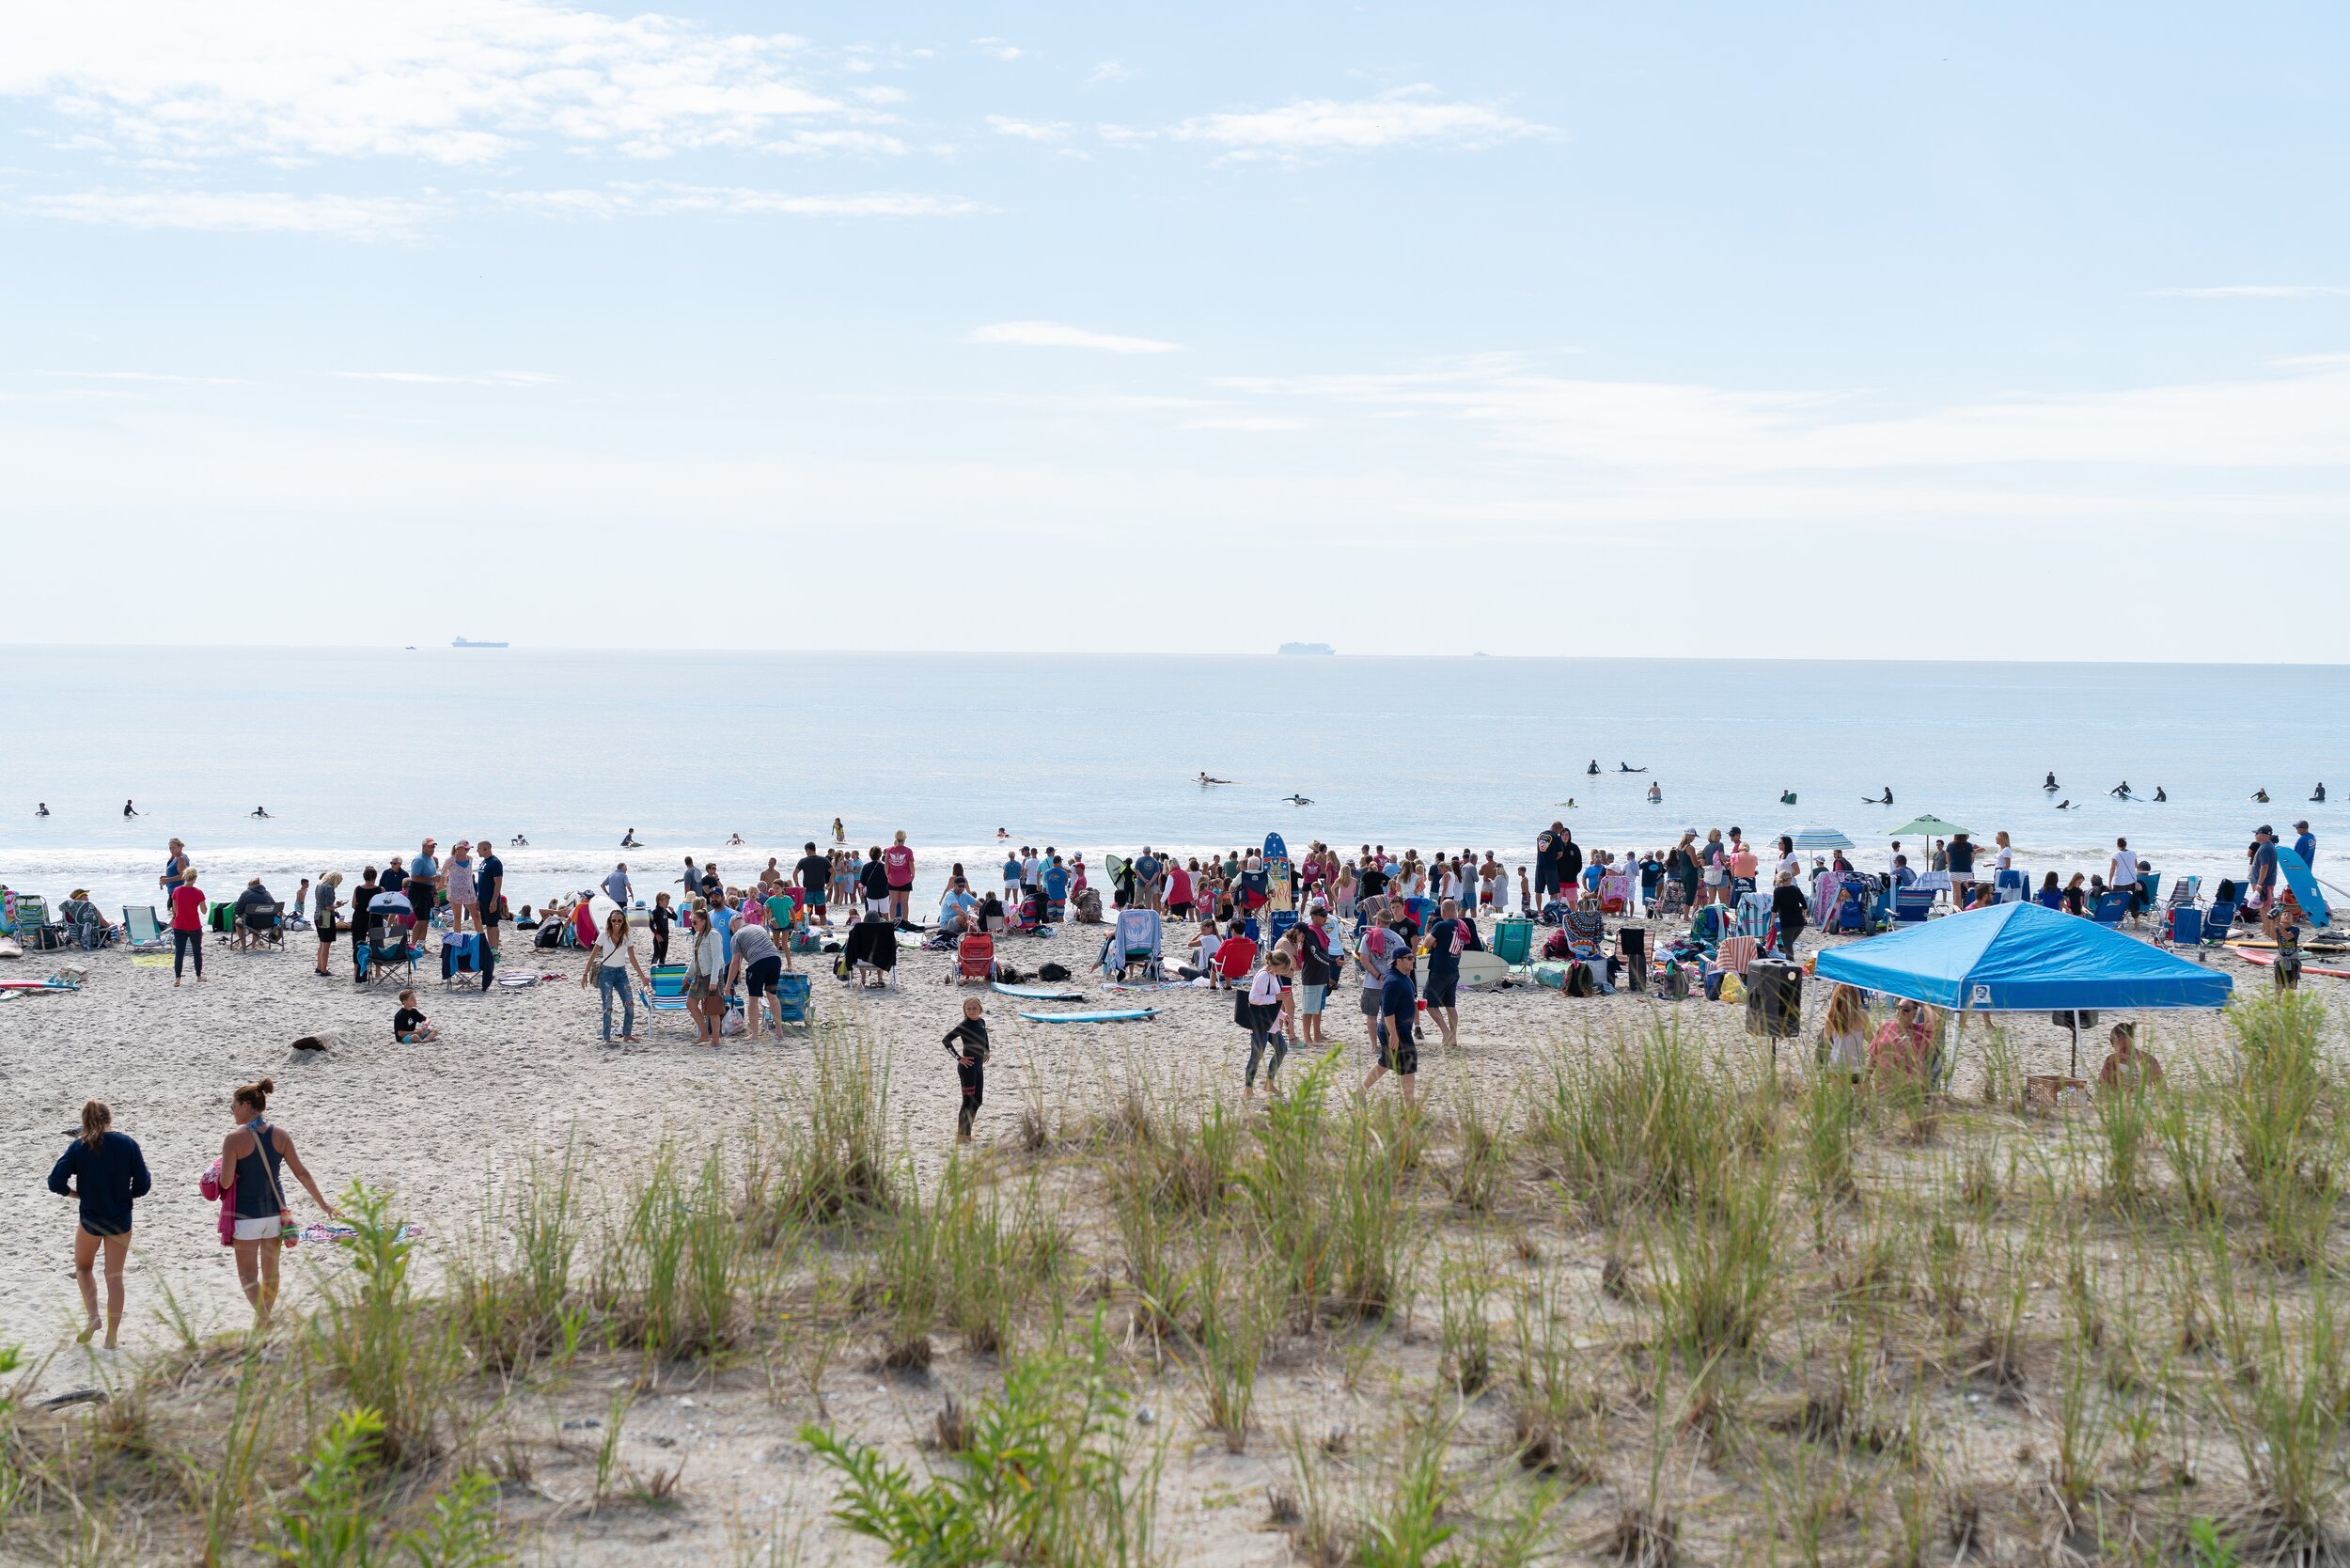   The location of the event, Beach 91st Street, is where Richie Allen used to surf.&nbsp;  